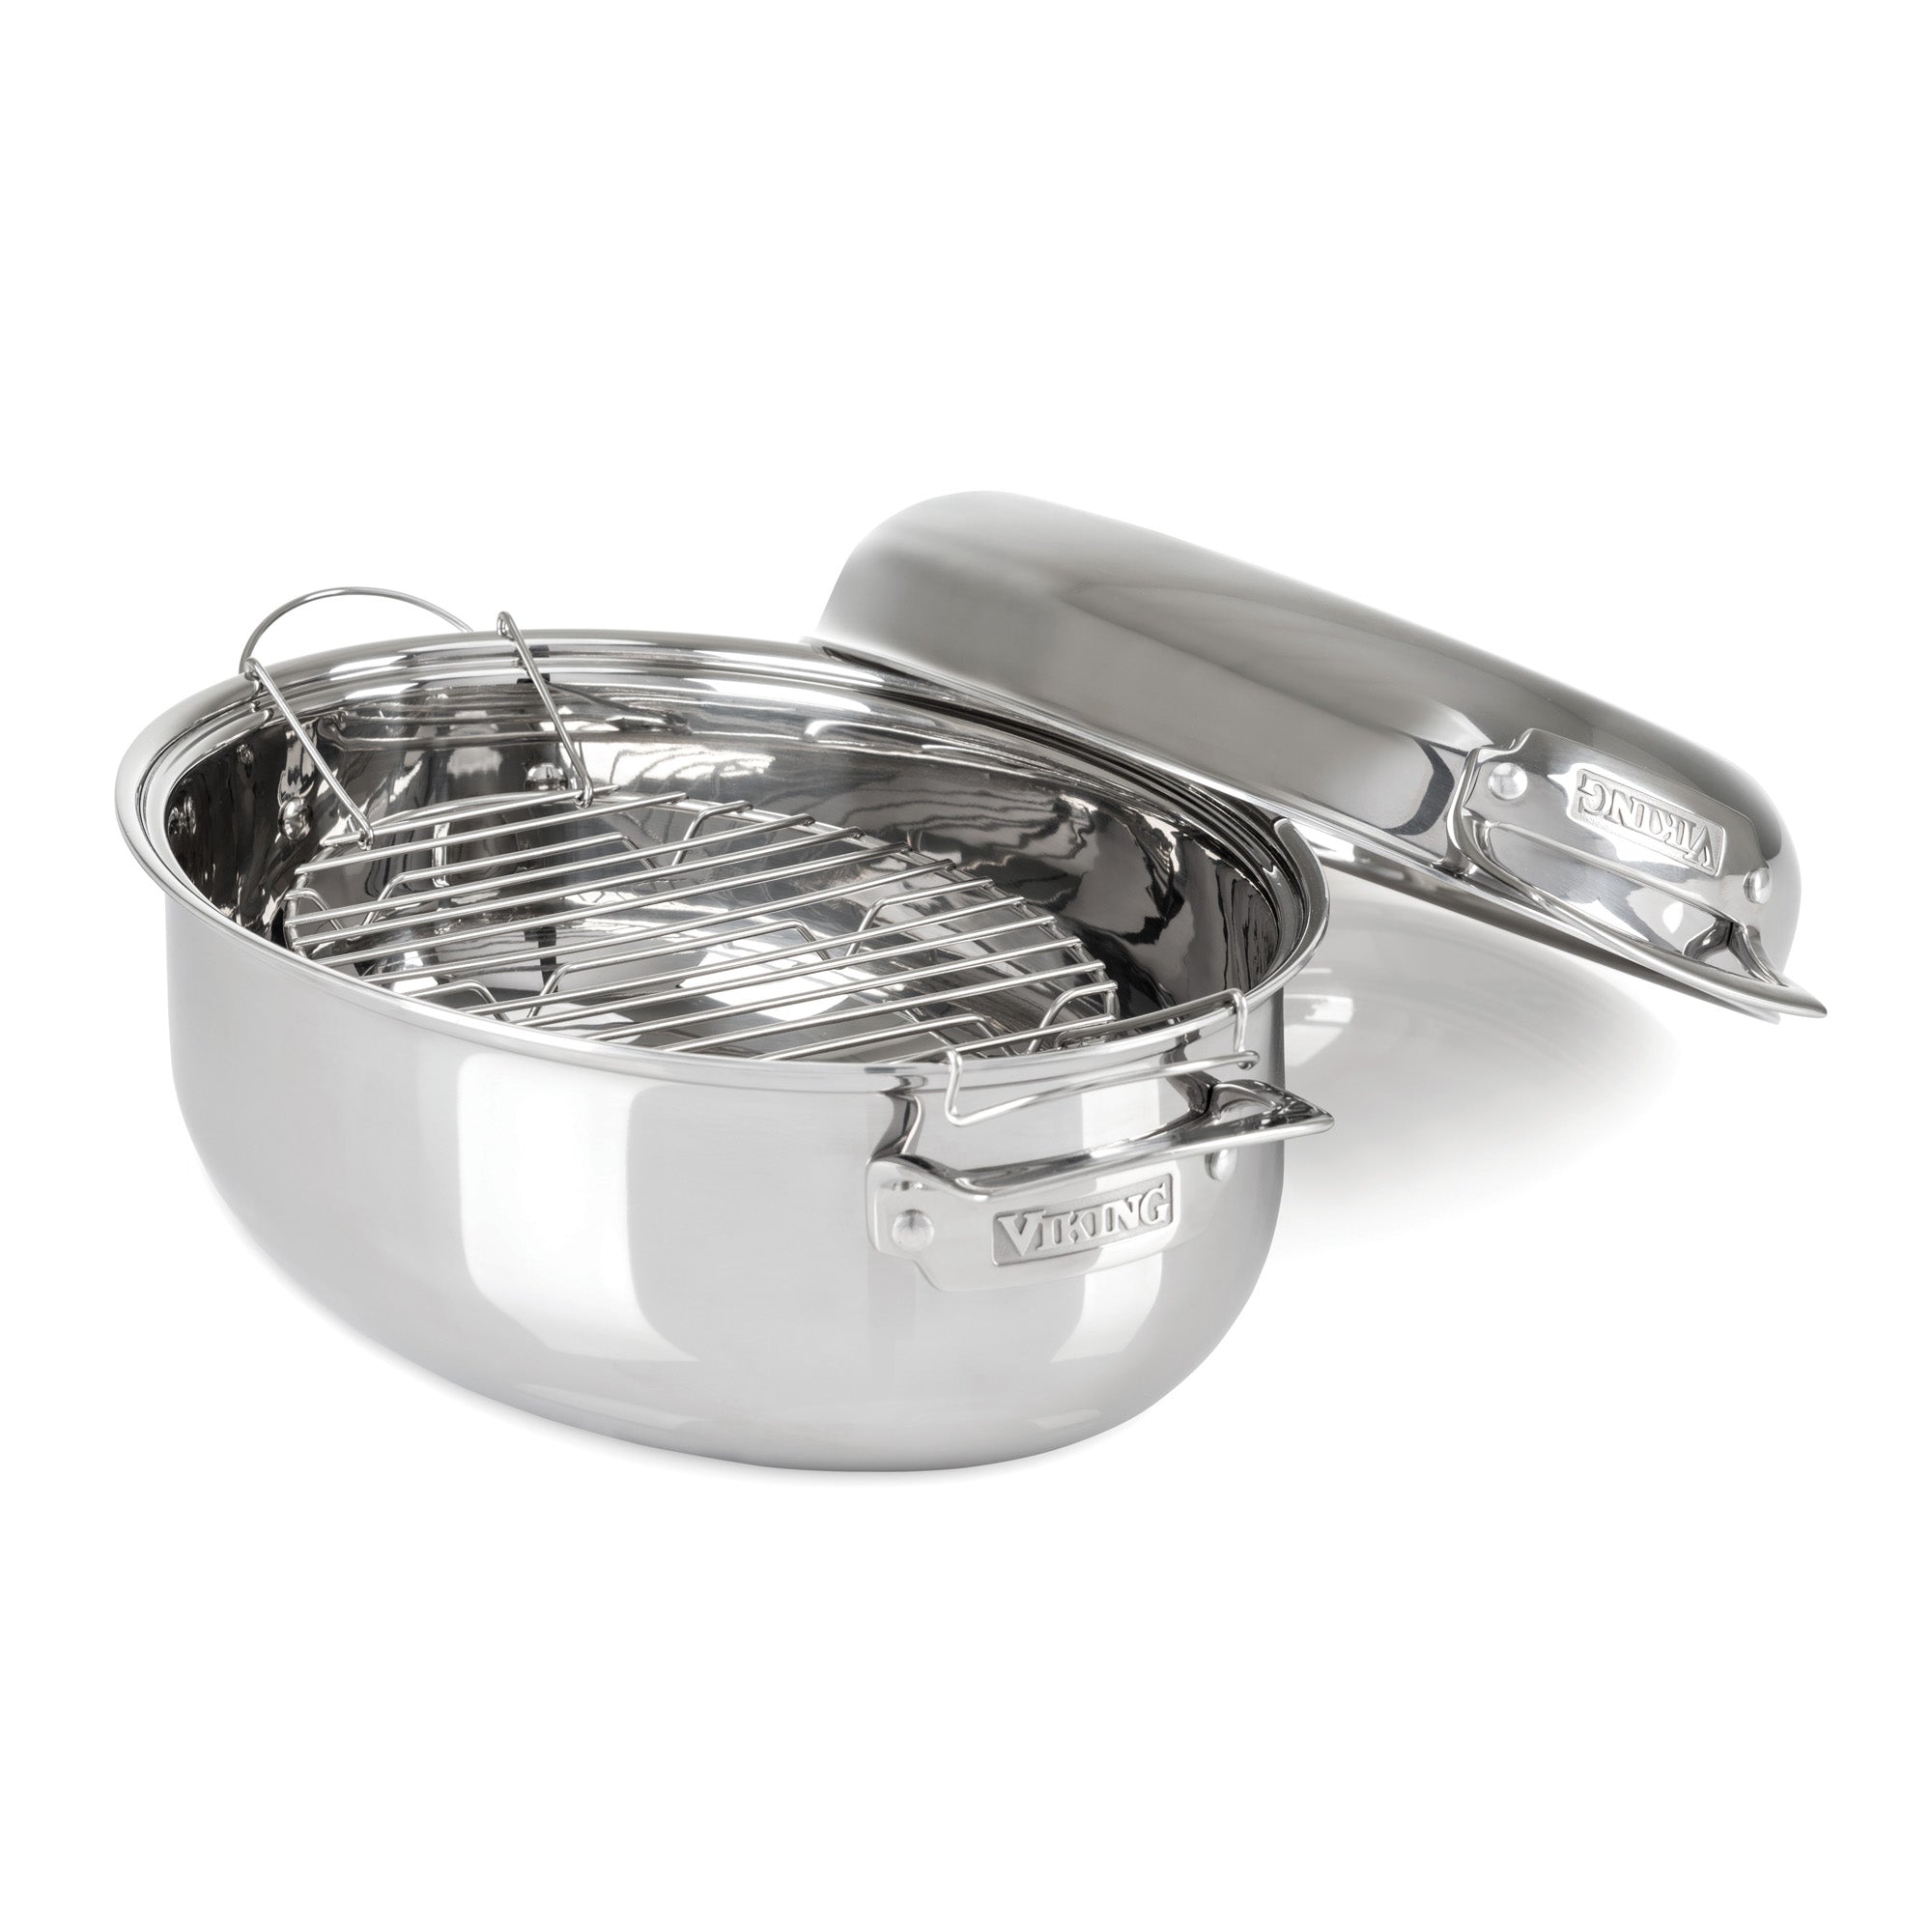 3-in-1 Oval Stainless Steel Roasting Pan and Stock Pot